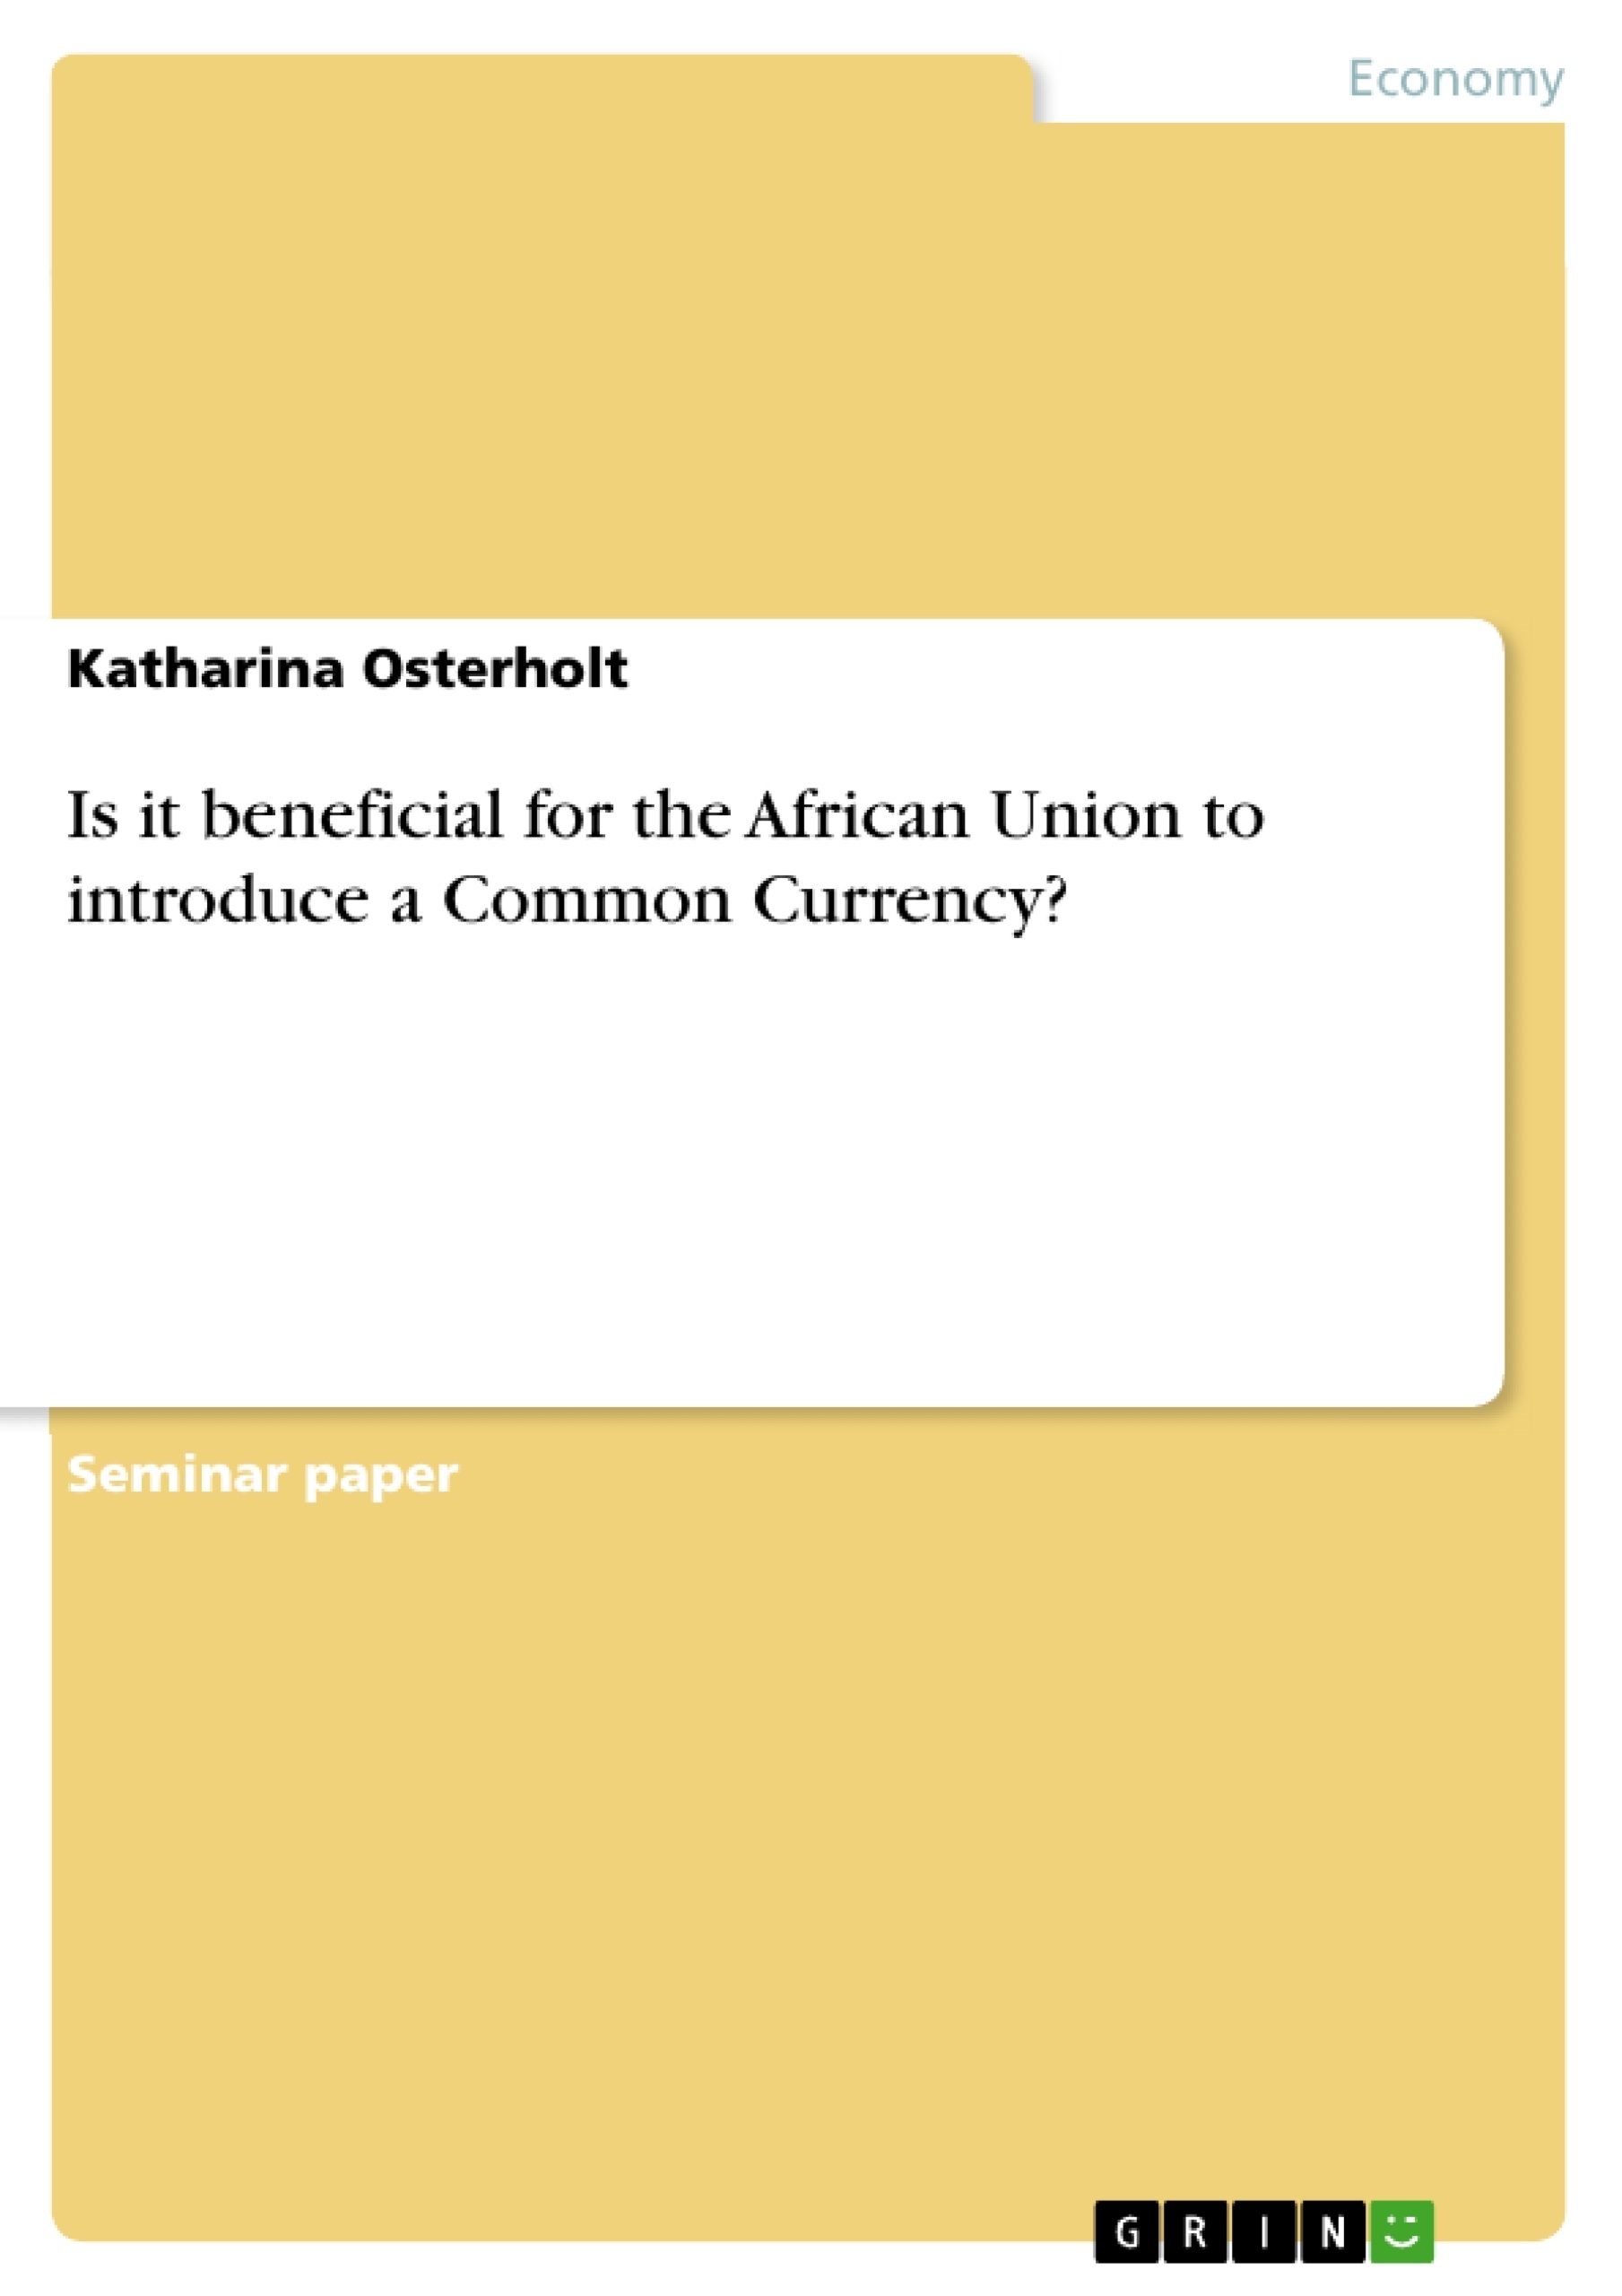 Título: Is it beneficial for the African Union to introduce a Common Currency?